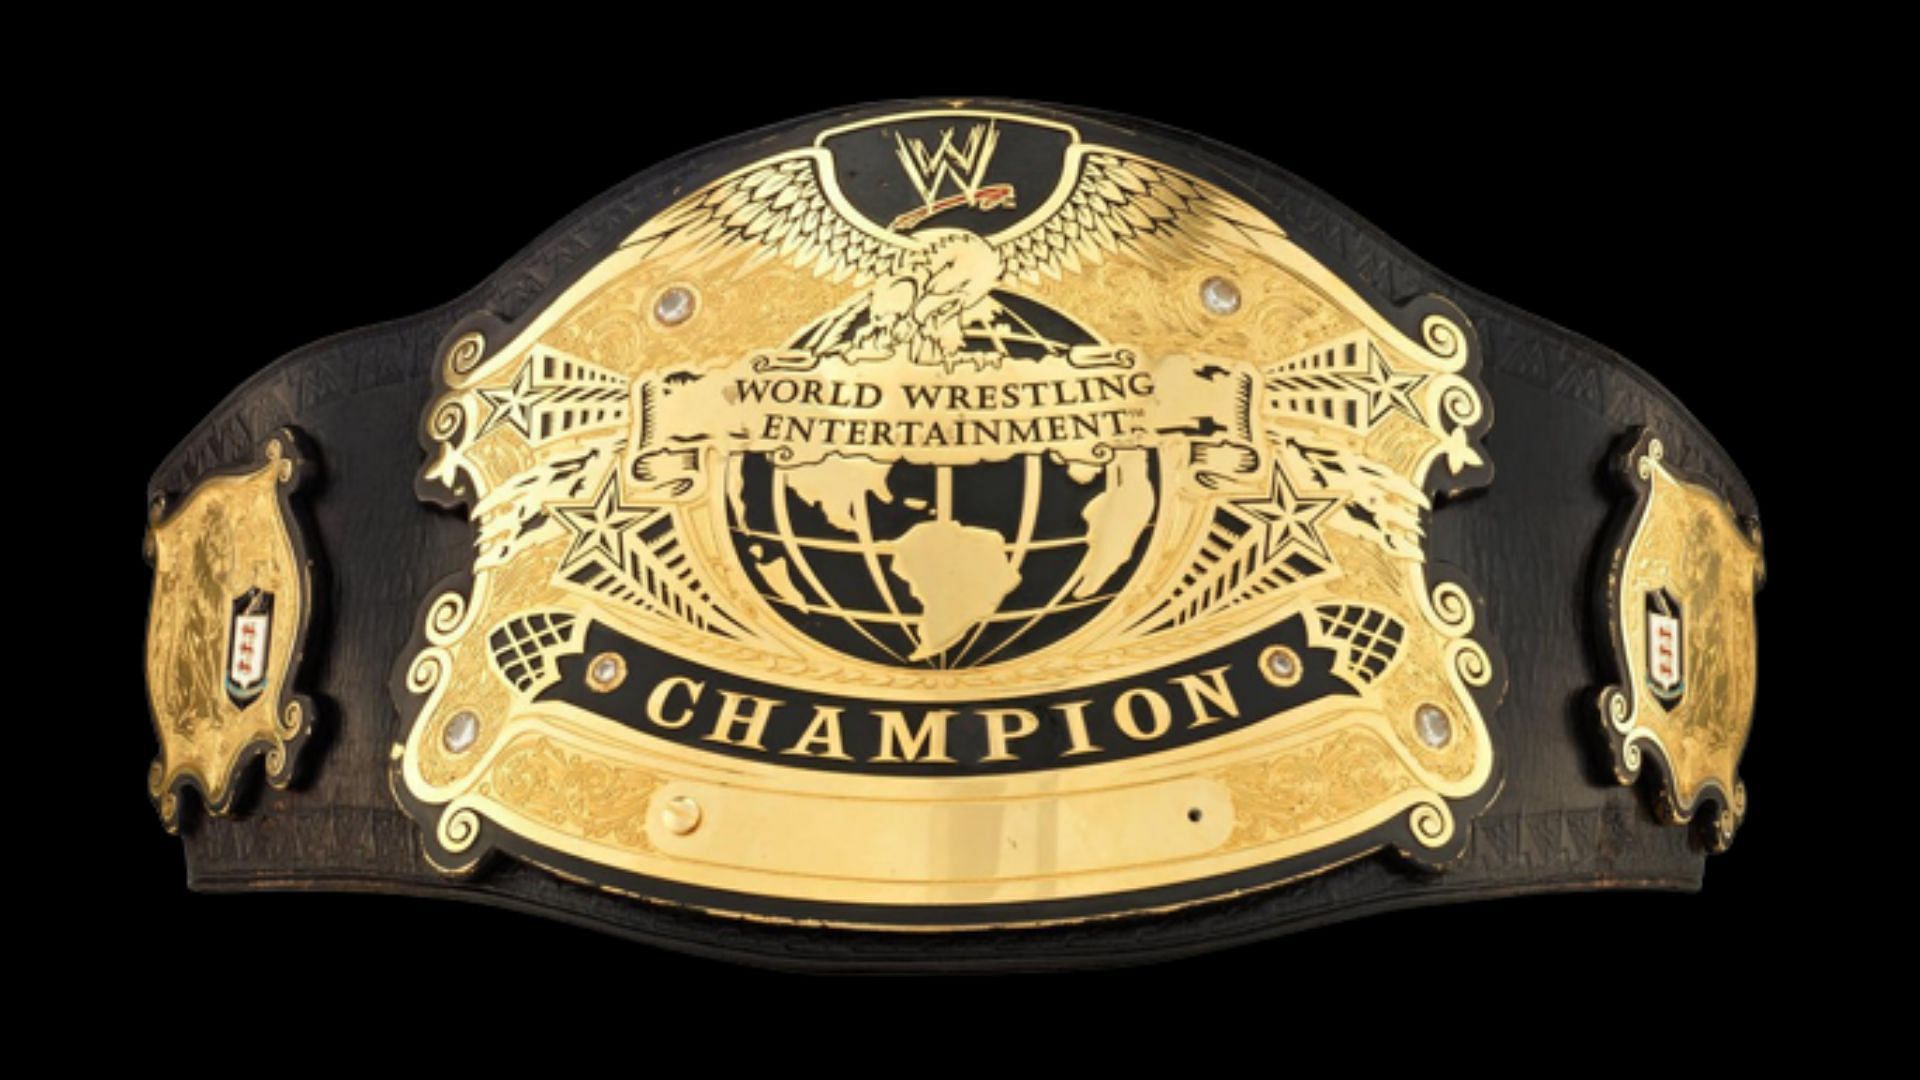 The WWE Championship had a different design in 2004